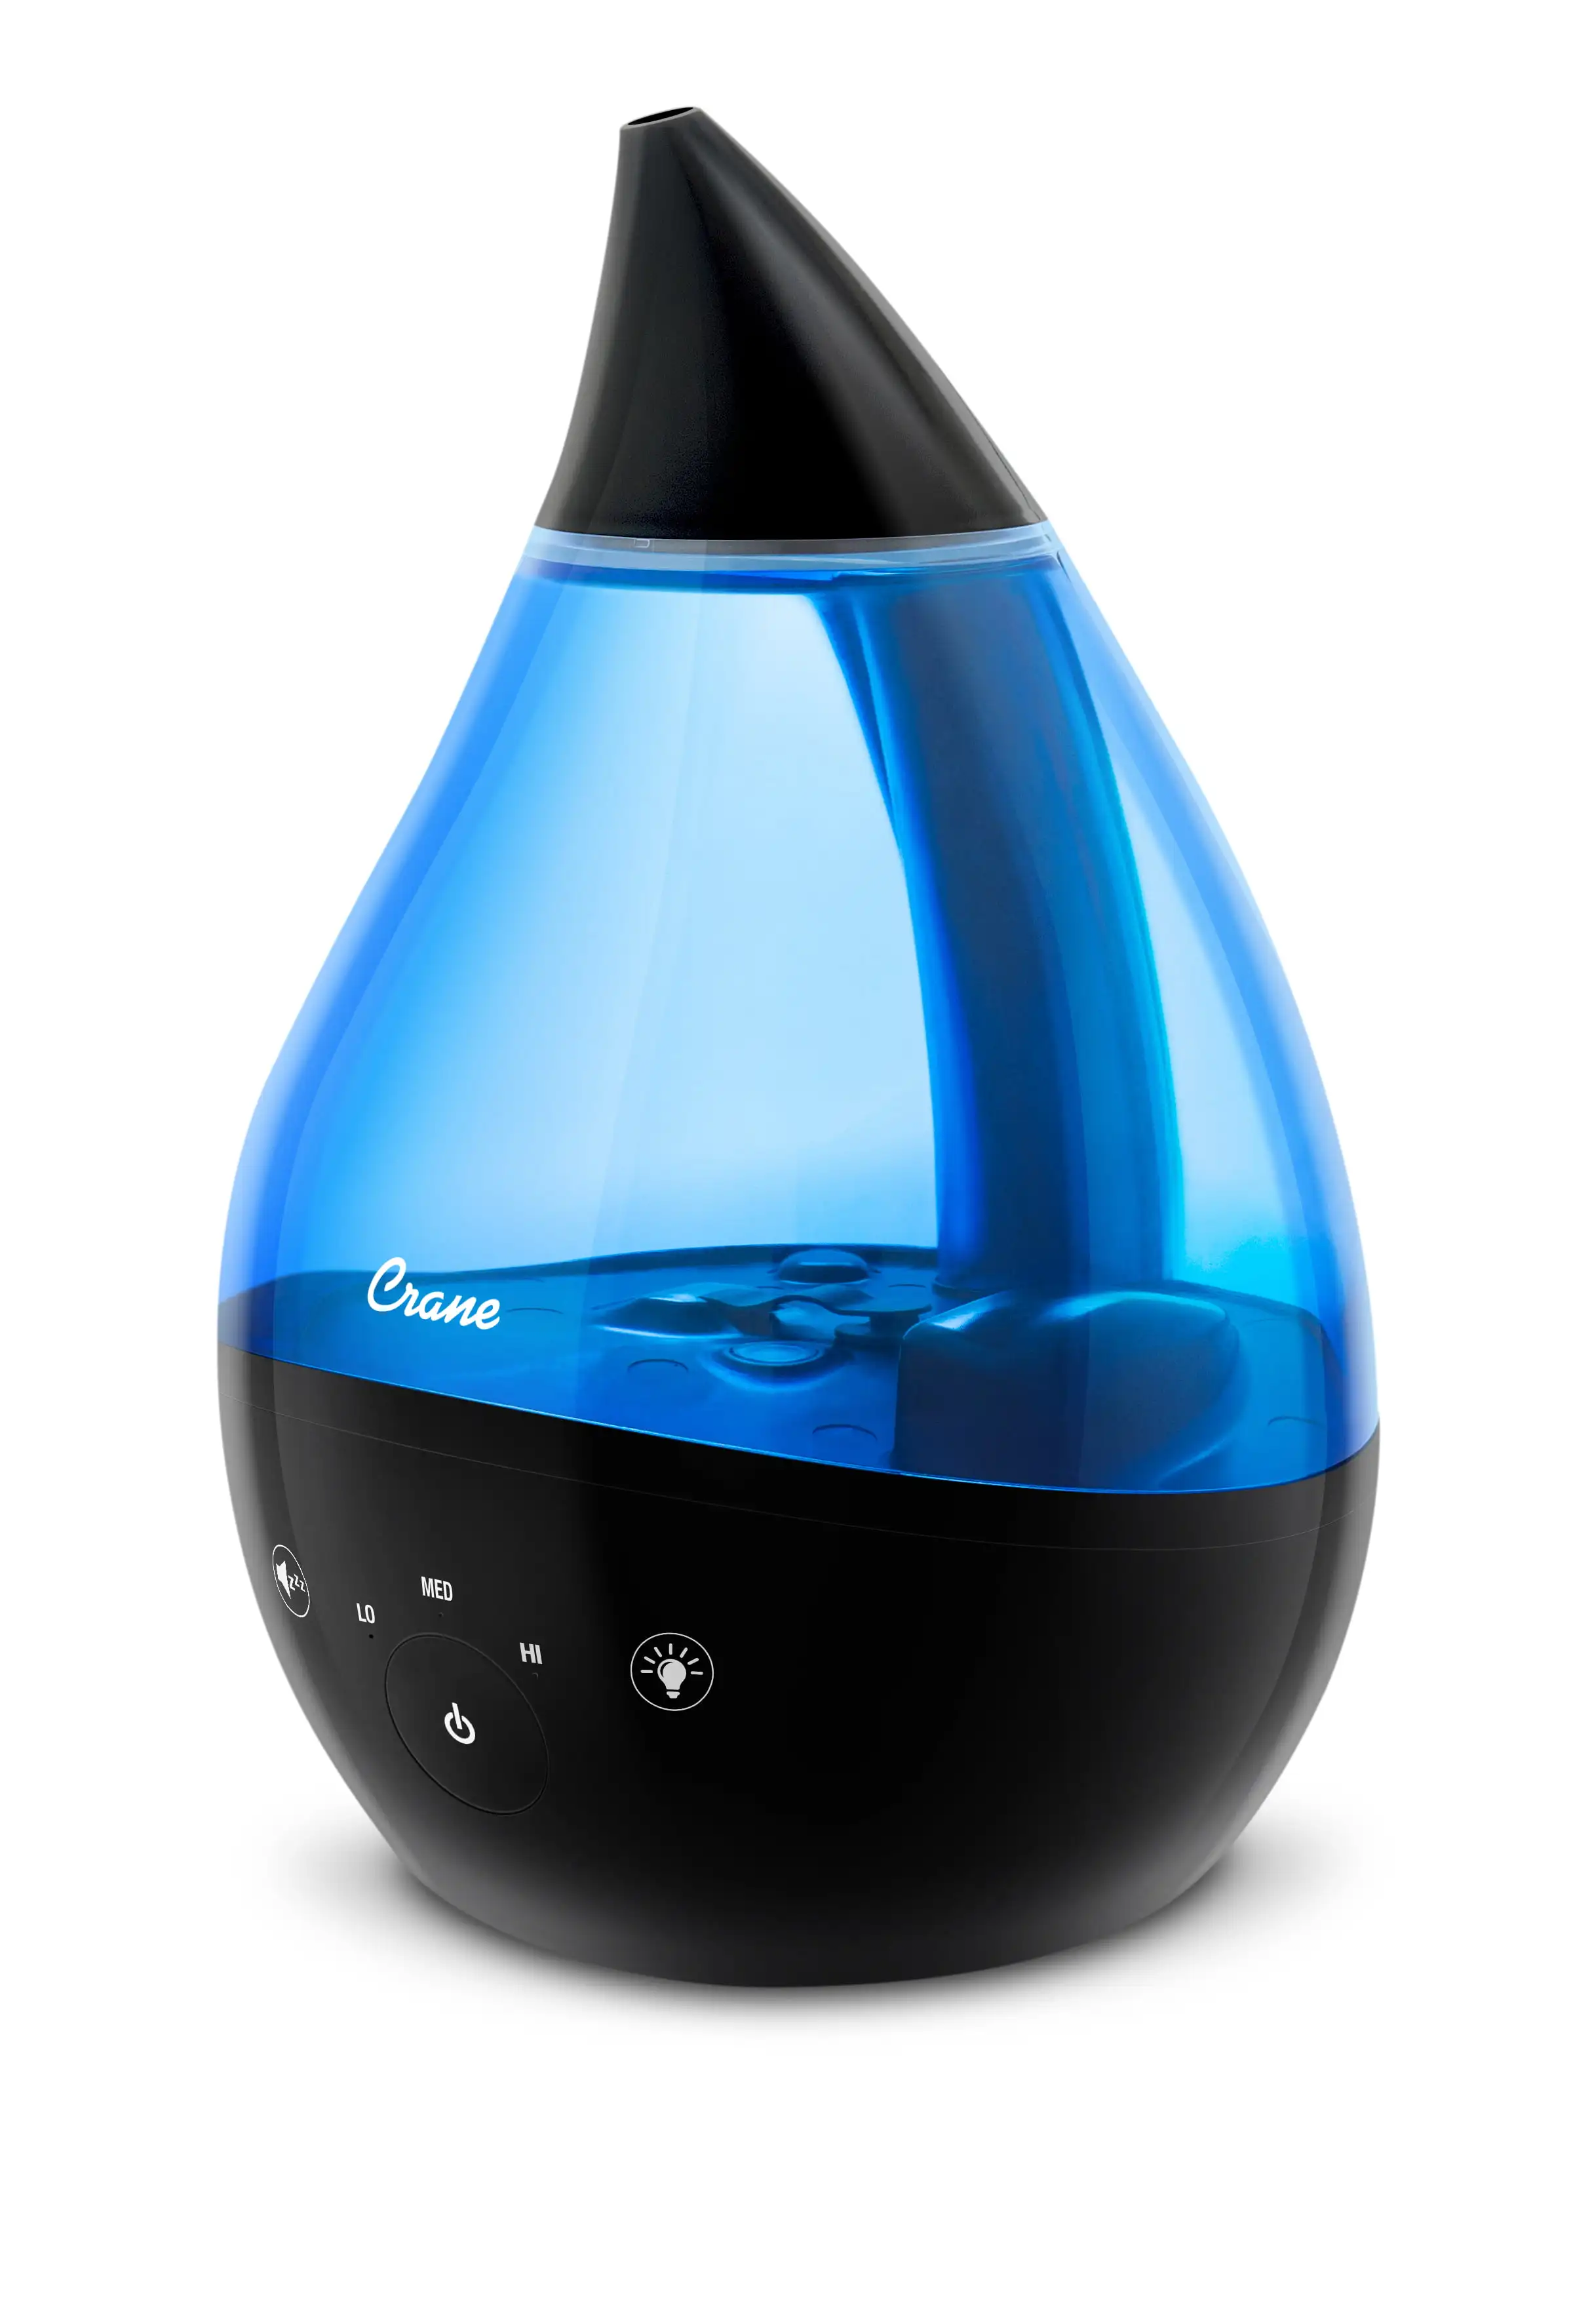 

USA Top Fill Drop 1 Gallon Ultrasonic Cool Humidifier with 24 Hour Run Time Black & Blue